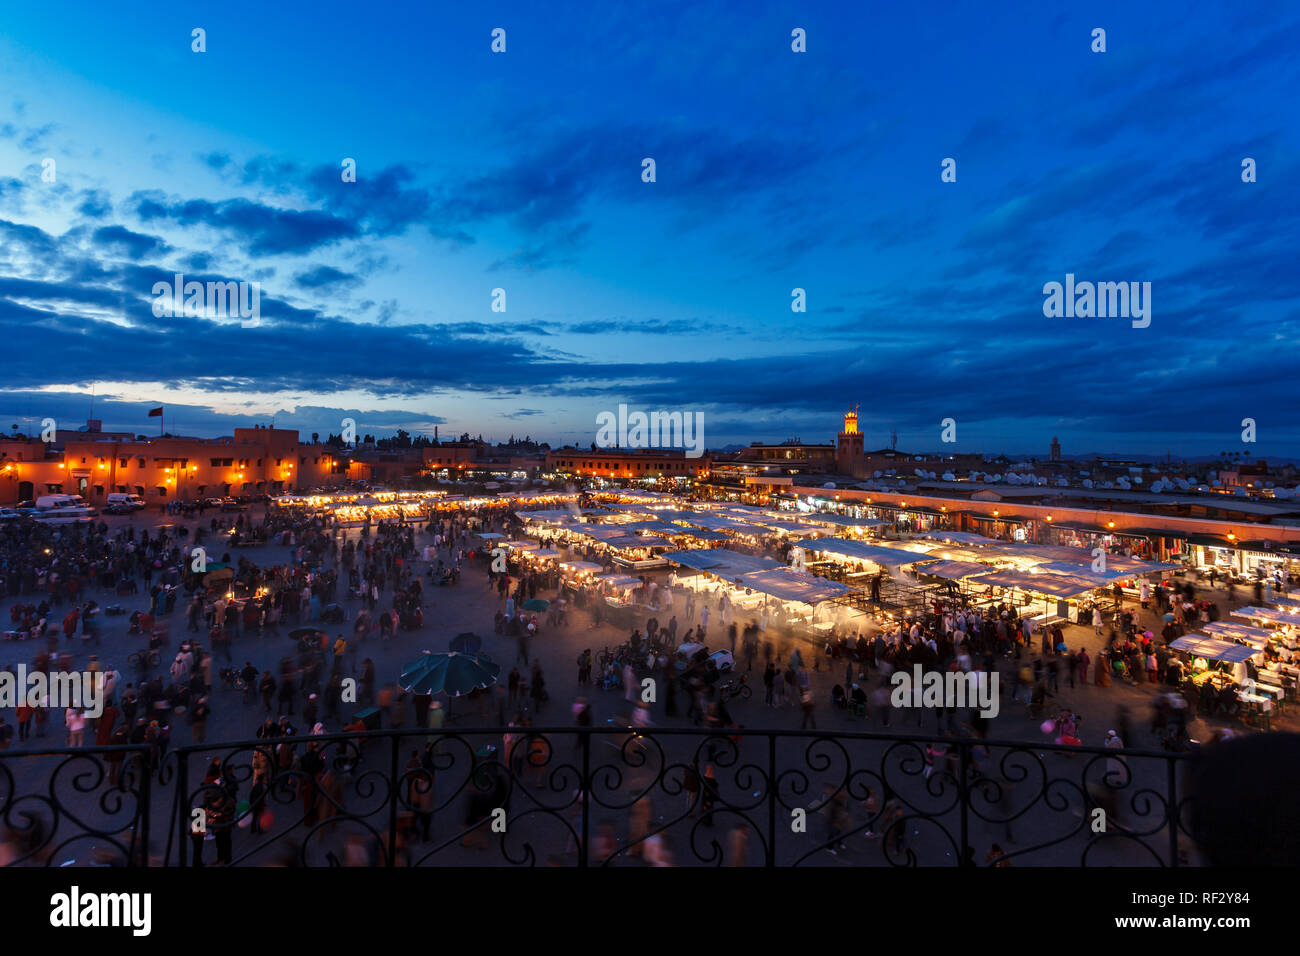 Marrakesh market at night viewed from above at twilight Stock Photo